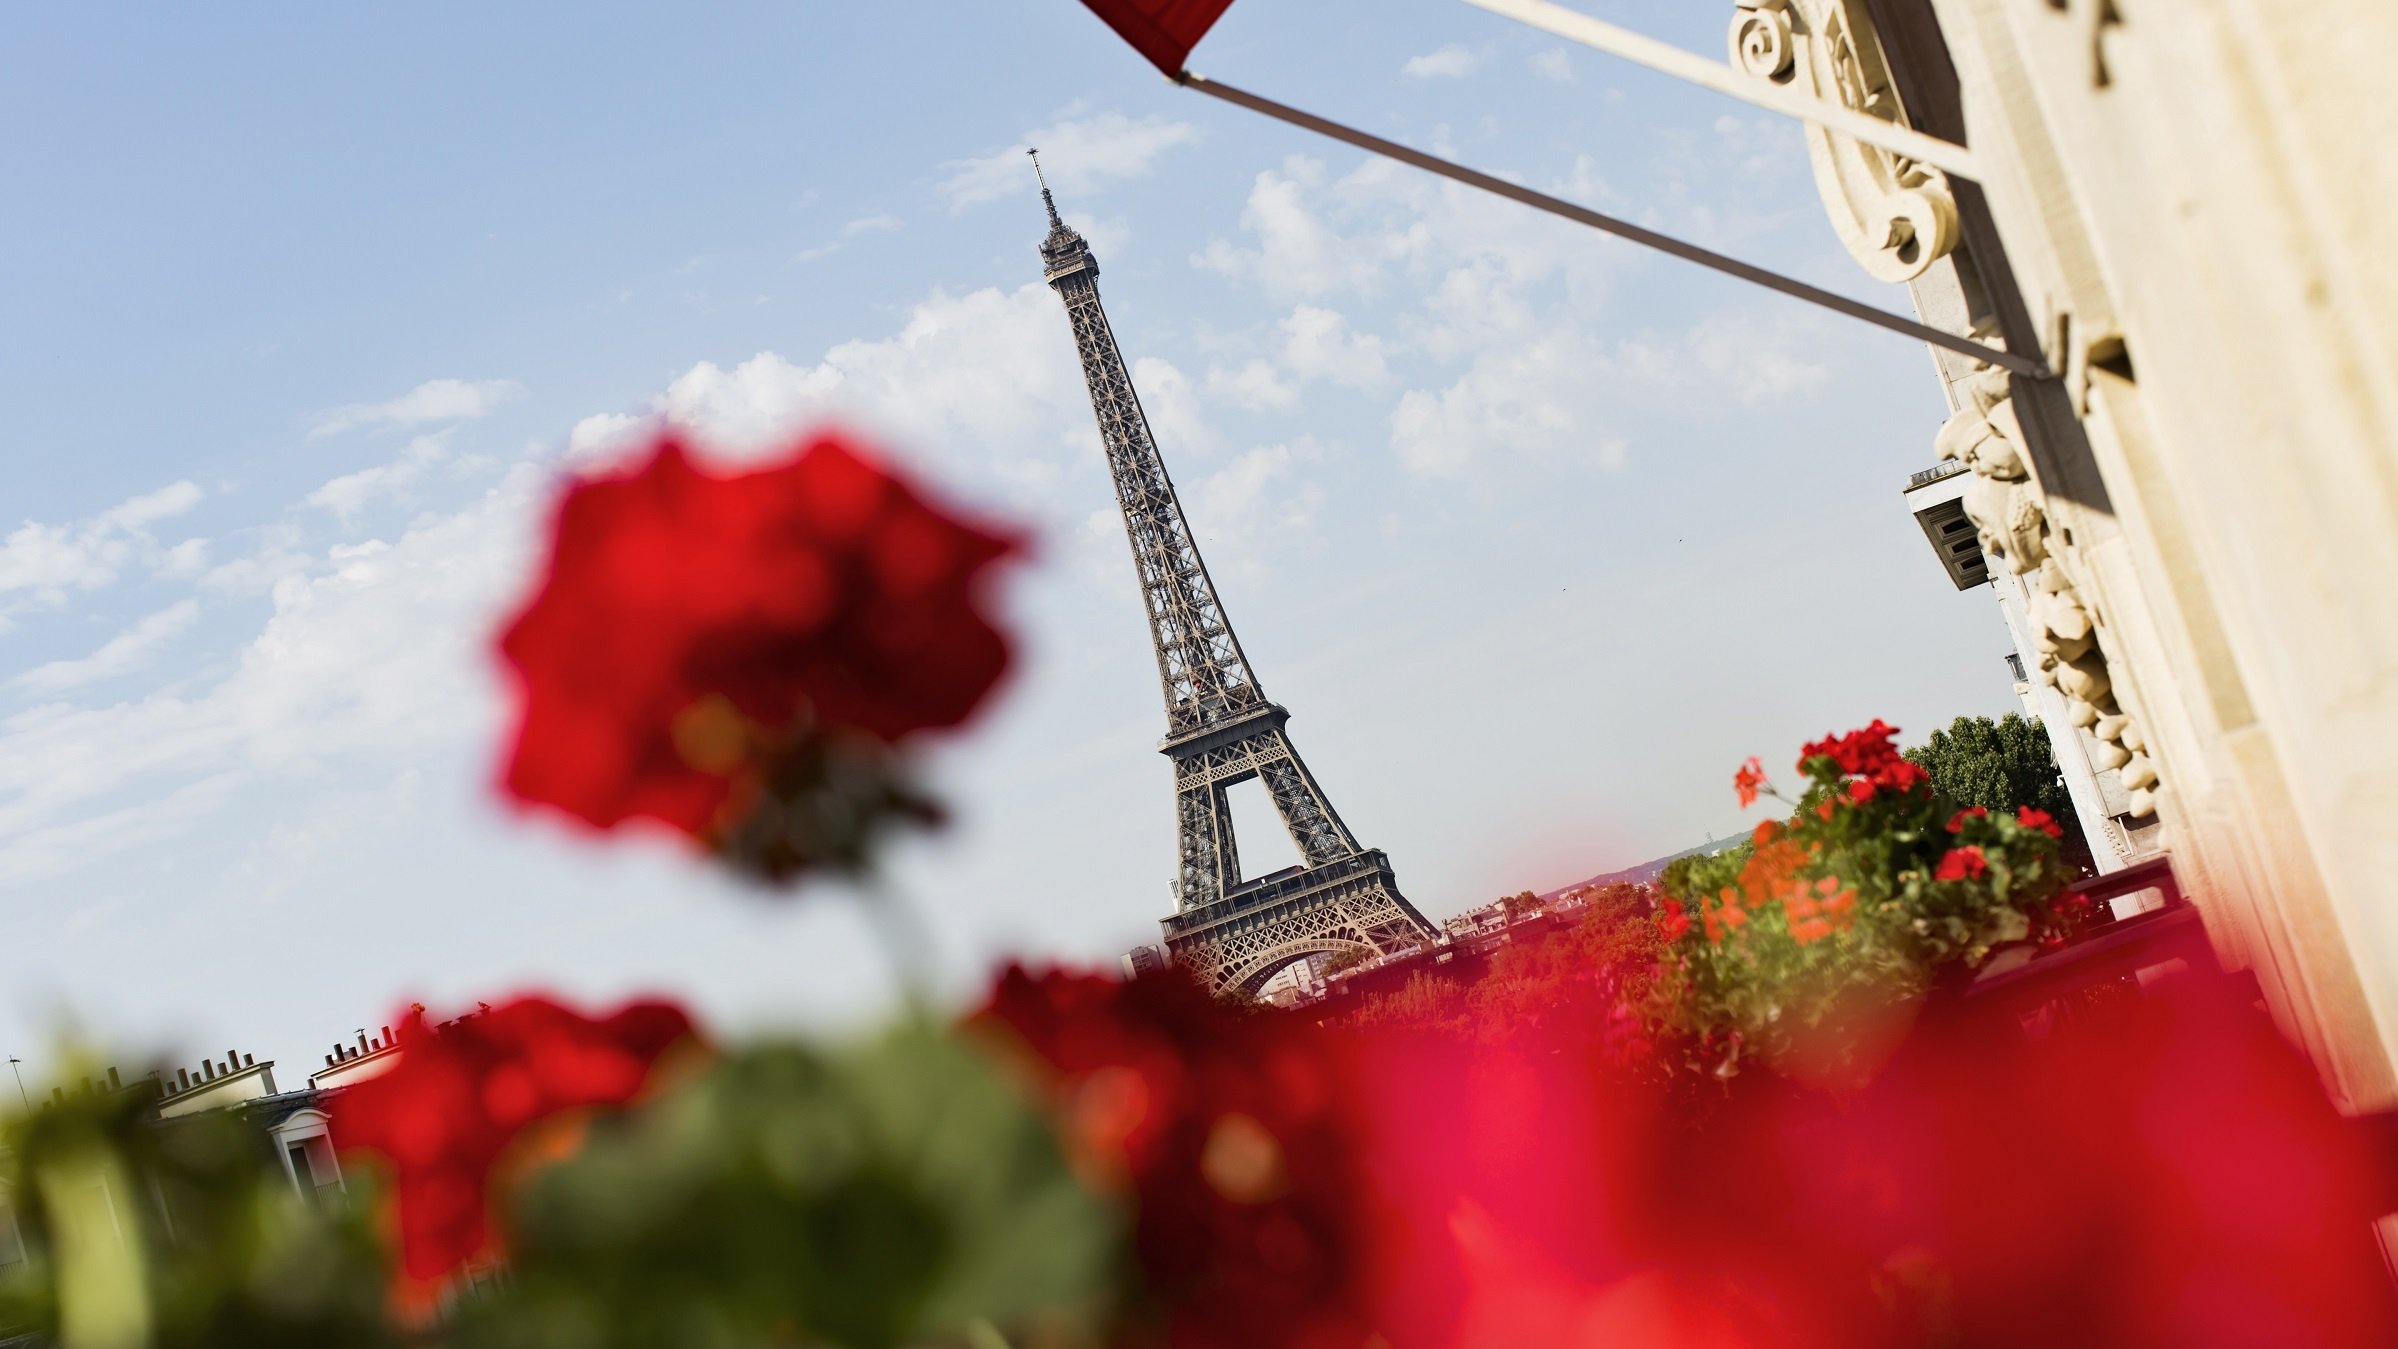 View of Eiffel Tower and geraniums Hotel Plaza Athenee Paris